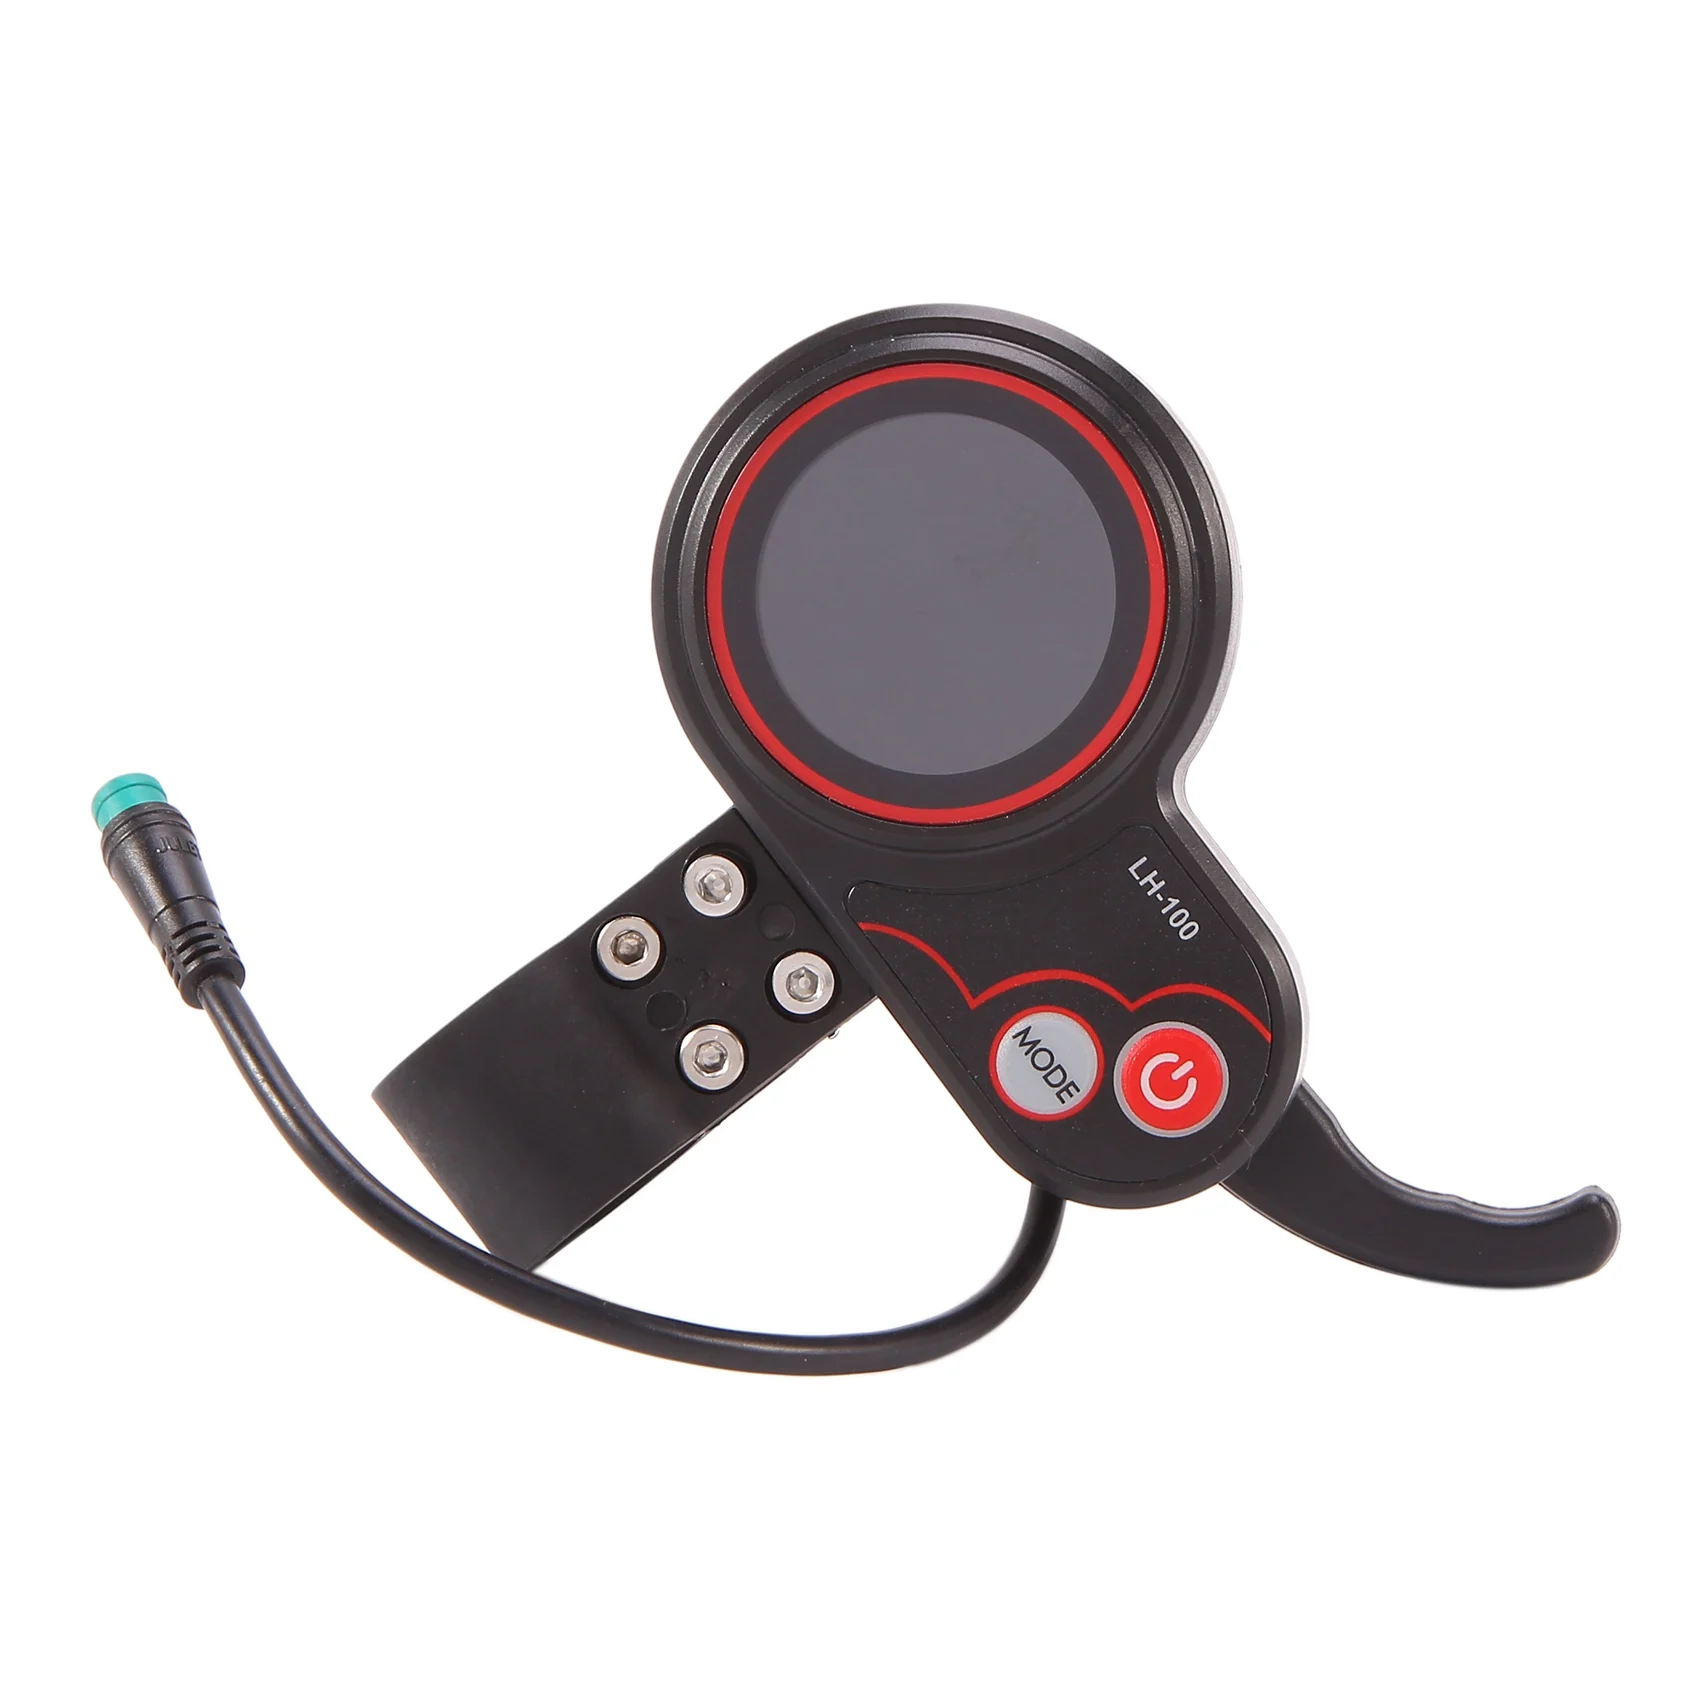 

LCD-LH100 24V/36V/48V/60V 5 Pins Electric Bike Display Thumb Throttle Speedometer Control Panel for Electric Scooter